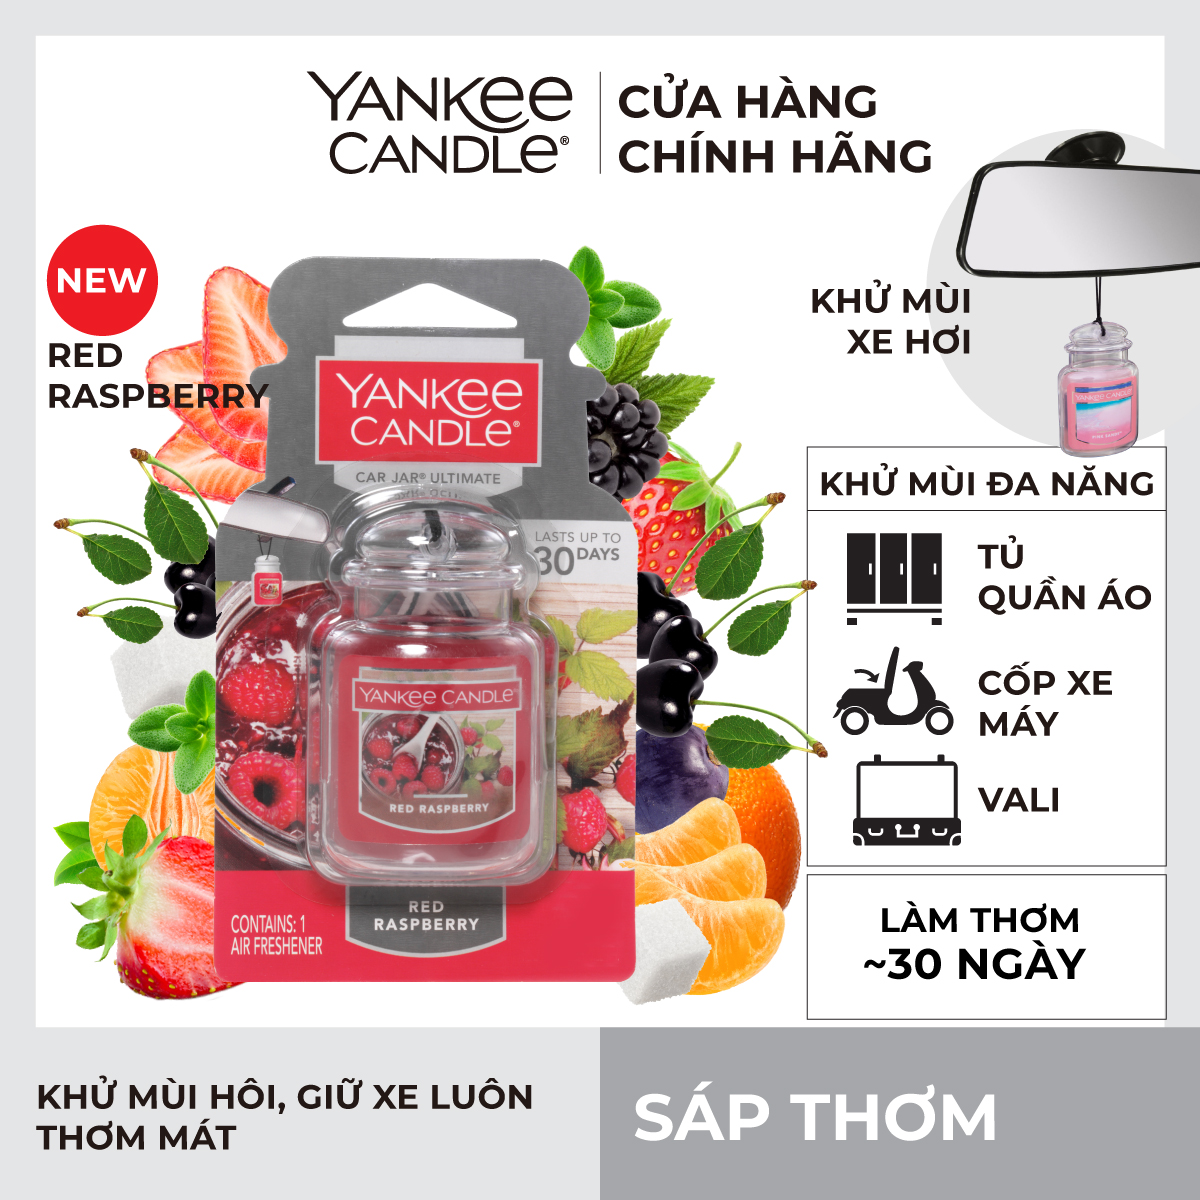 Sáp thơm xe Yankee Candle - Red Raspberry